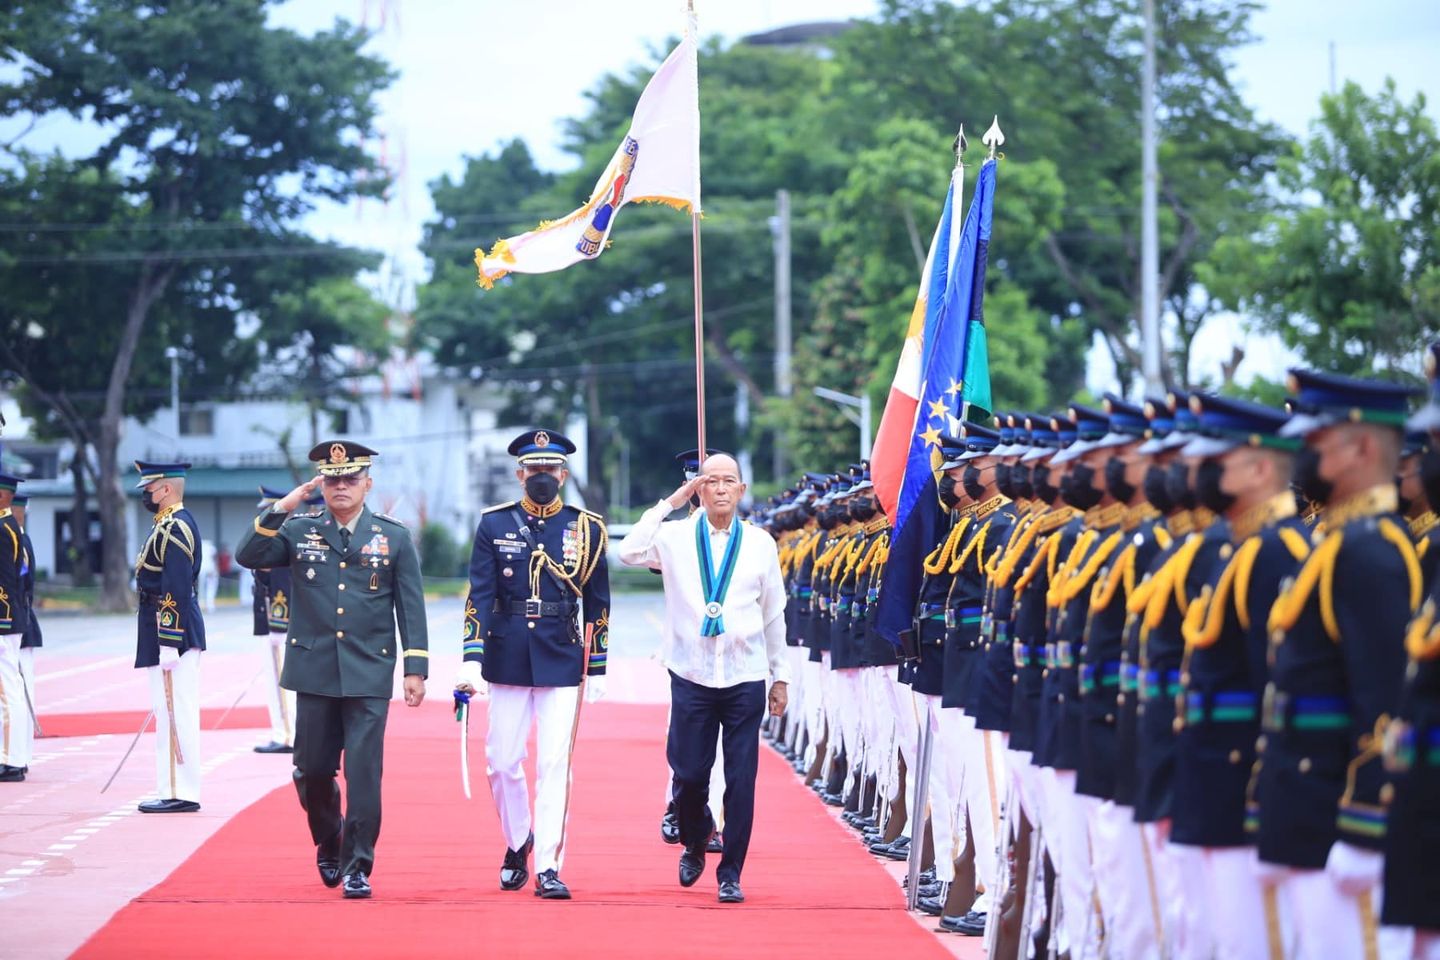 The Armed Forces of the Philippines (AFP) holds a testimonial parade and review in honor of outgoing Defense Secretary Delfin Lorenzana, who will end his term on June 30